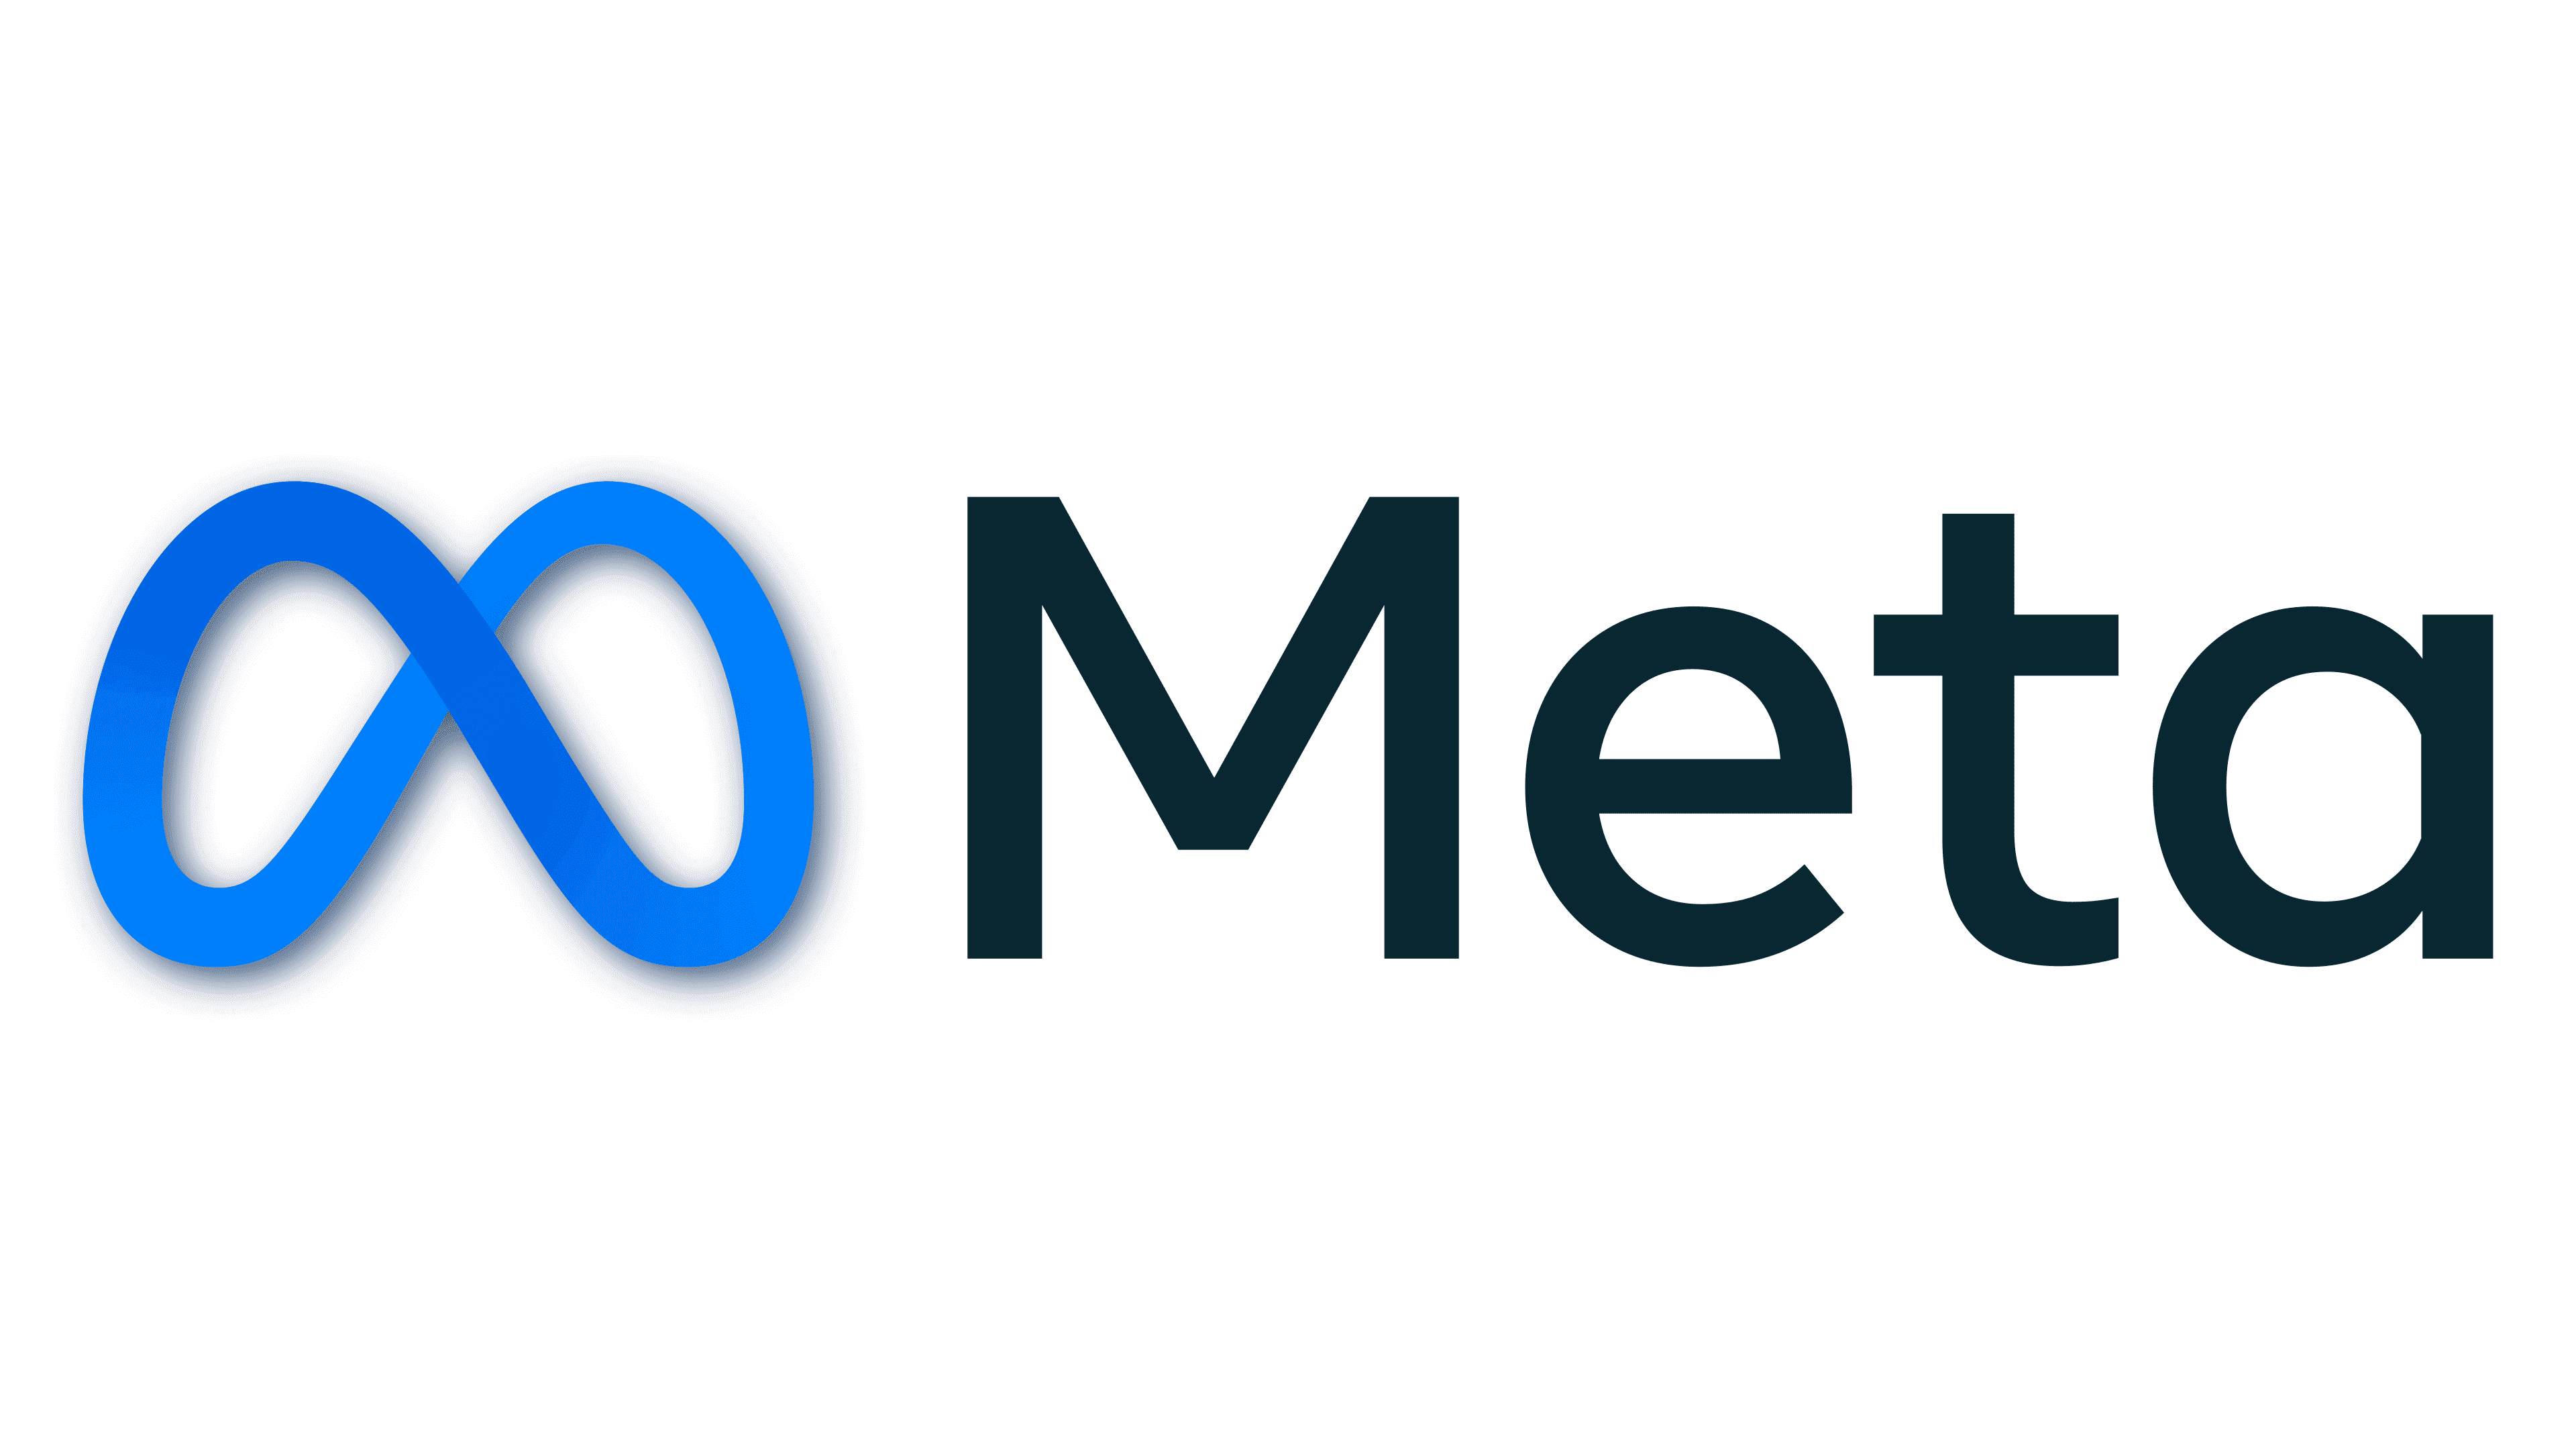 Meta is one of the Top AI stocks for 2023